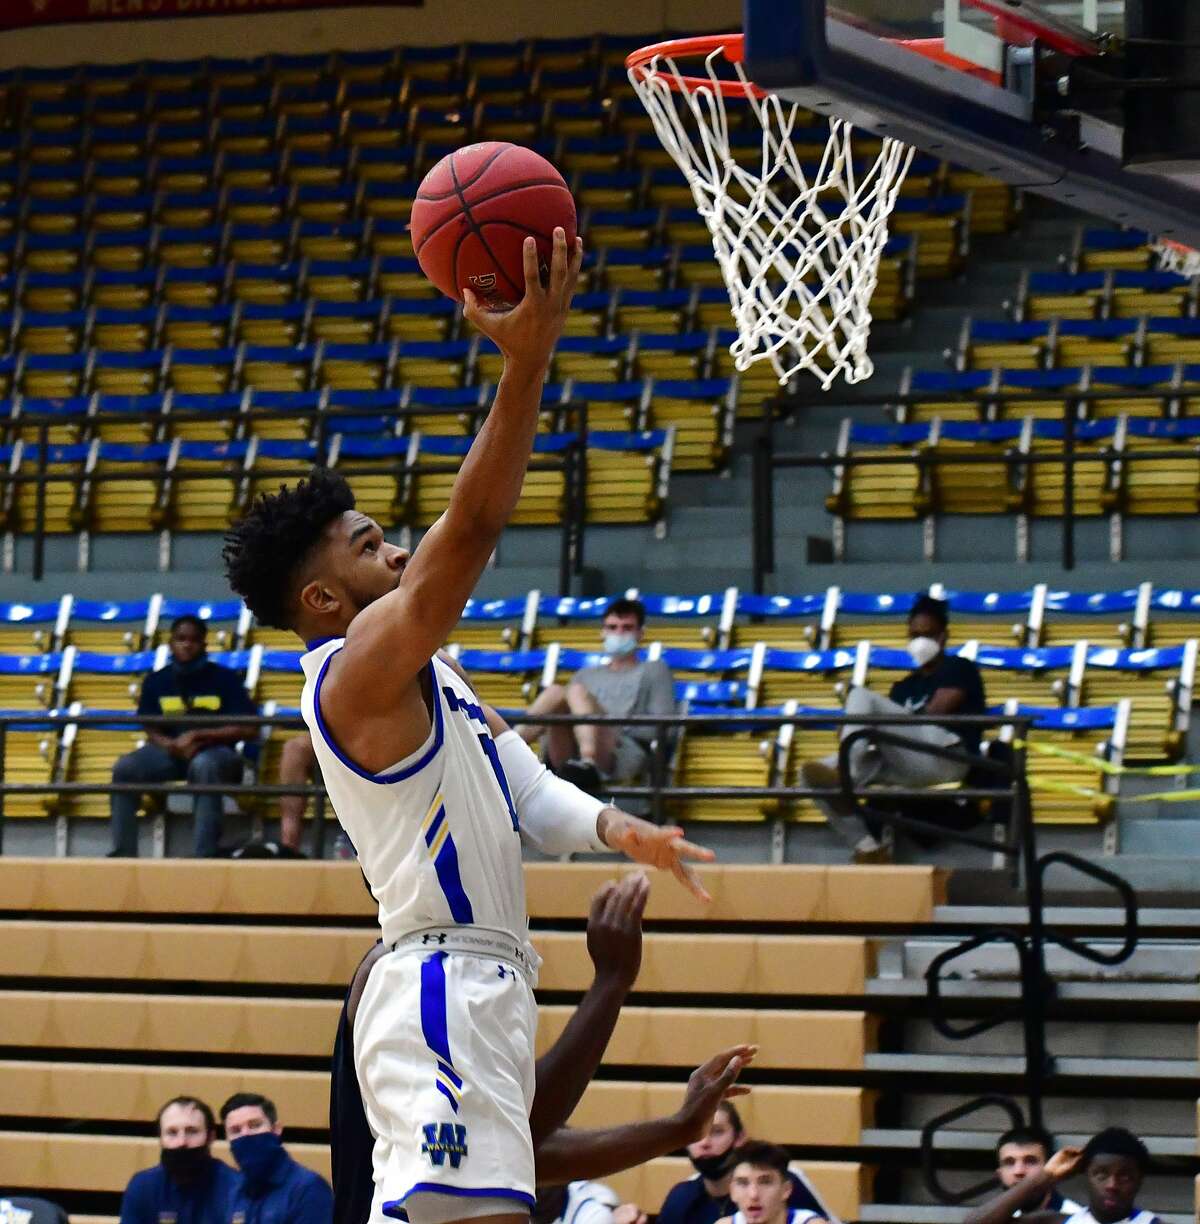 Wayland Baptist rolled past Arlington Baptist 96-52 to open the men's college basketball season on Friday afternoon, Oct. 30, 2020 in the Hutcherson Center.